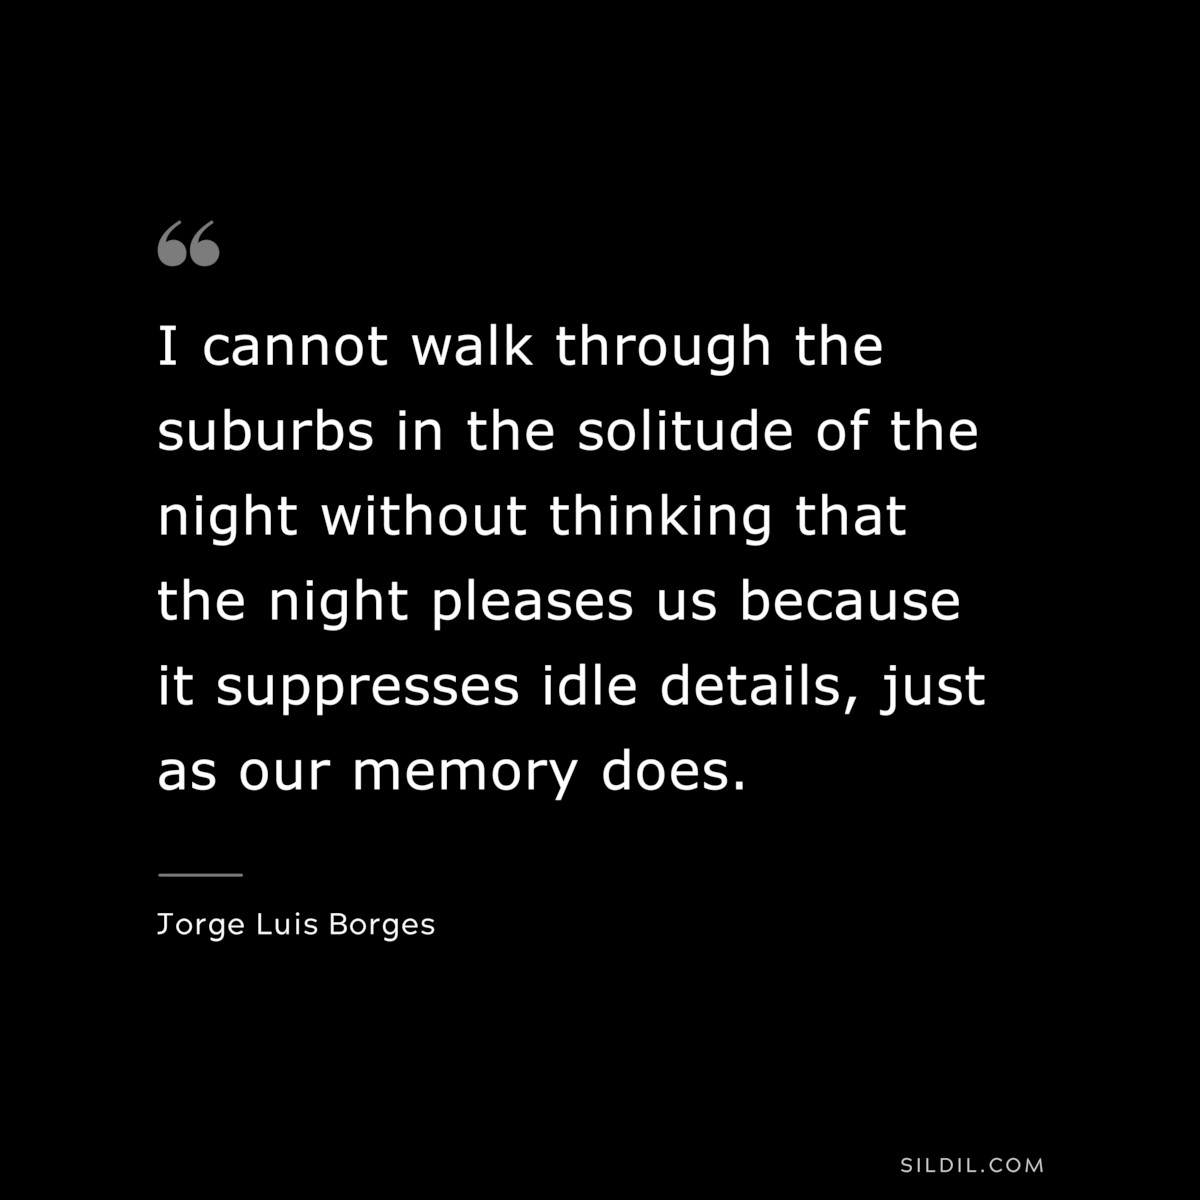 I cannot walk through the suburbs in the solitude of the night without thinking that the night pleases us because it suppresses idle details, just as our memory does. ― Jorge Luis Borges